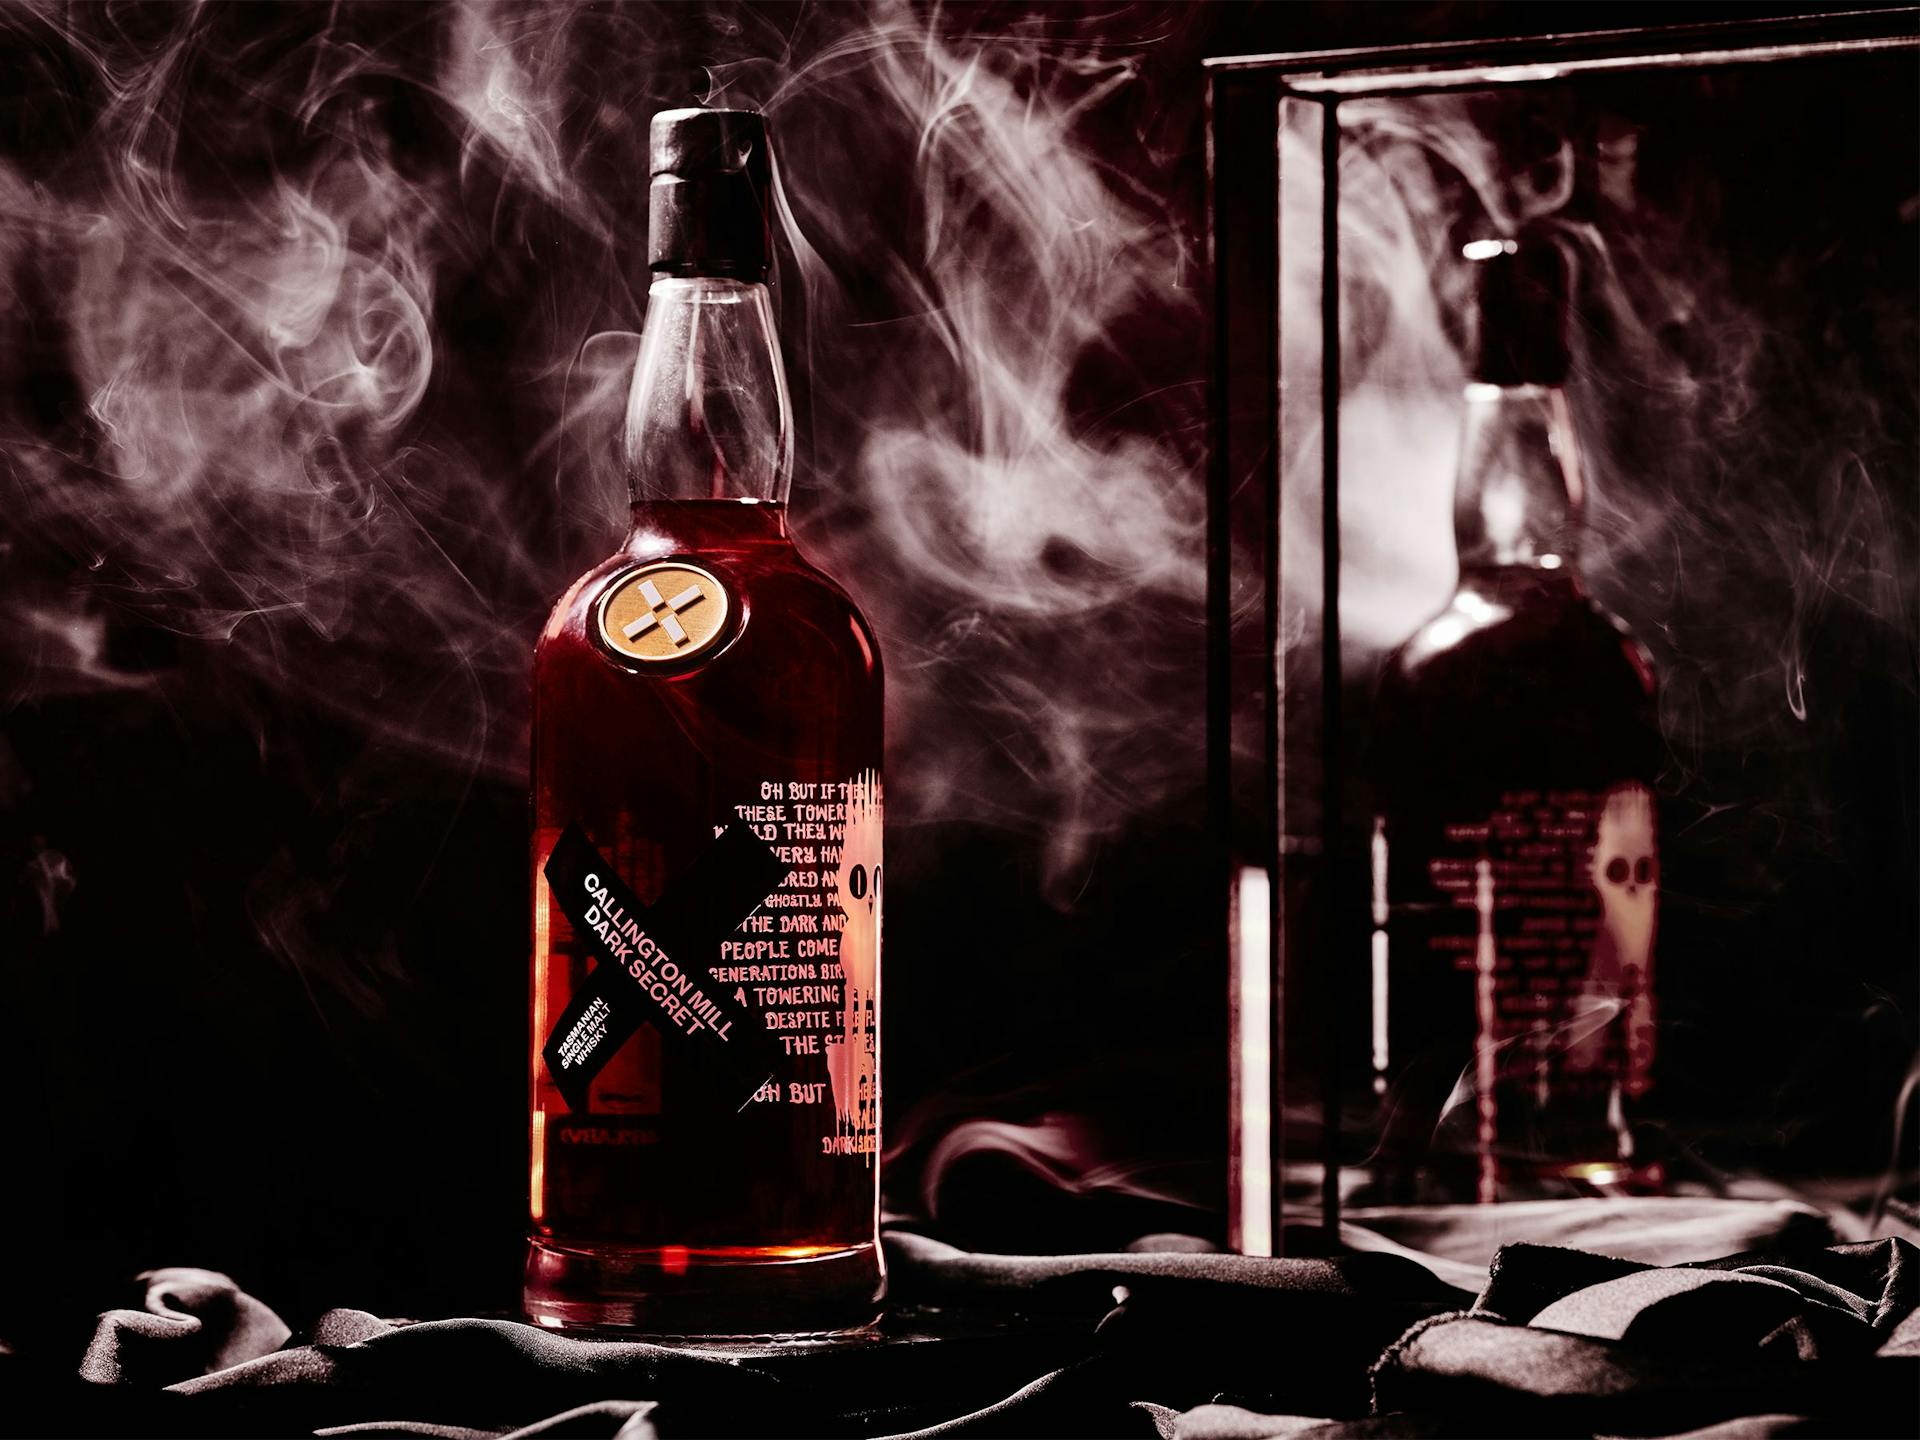 A bottle of Callington Dark Secret reflected in a mirror and surrounded by smoke